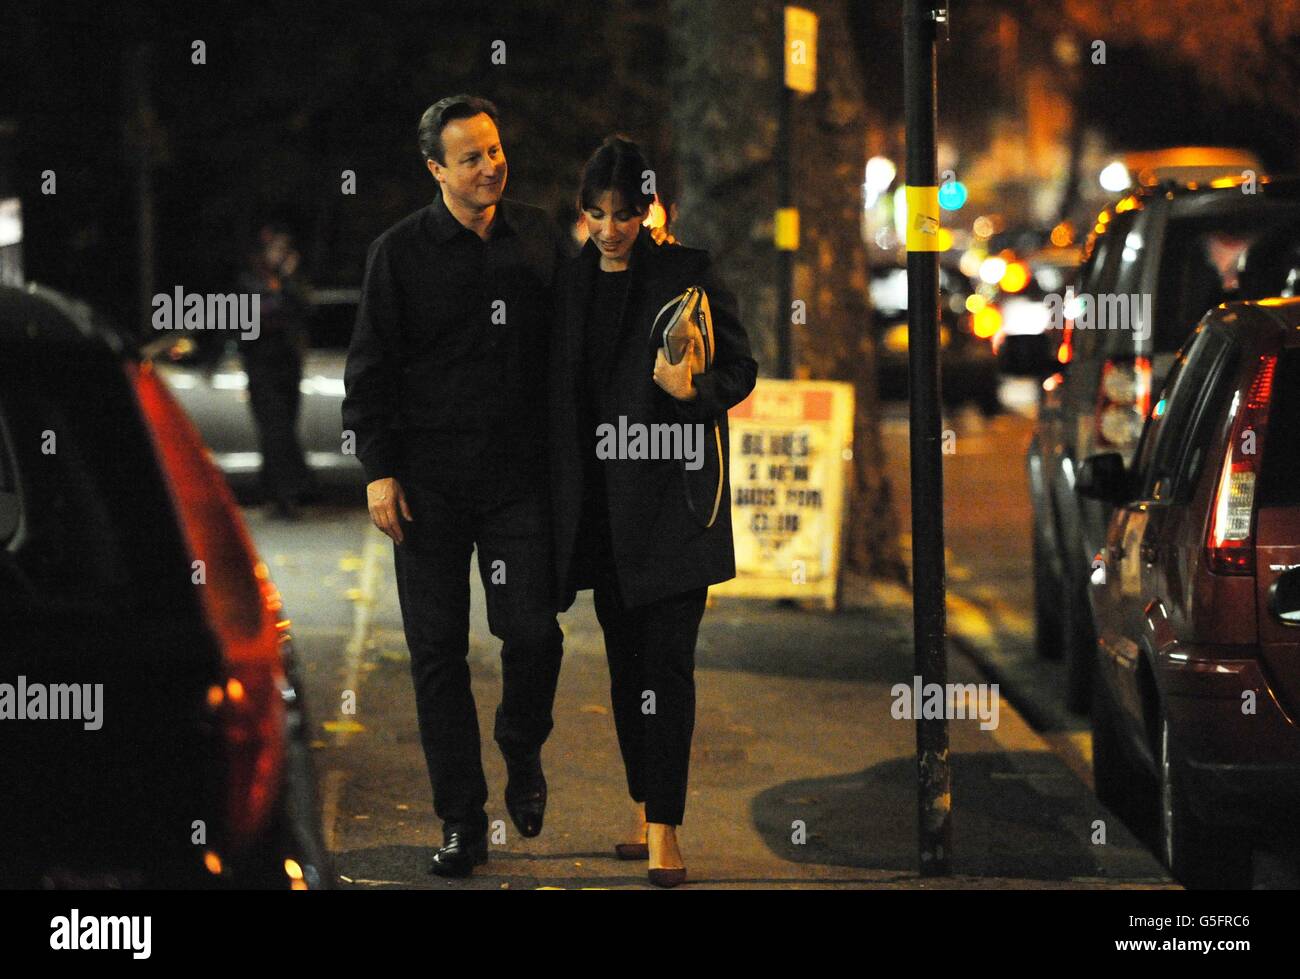 Prime Minister David Cameron and his wife Samantha arrive at the Diwan Balti restaurant in Birmingham to celebrate his 46th birthday, whilst in the city for the Conservative Party conference. Stock Photo